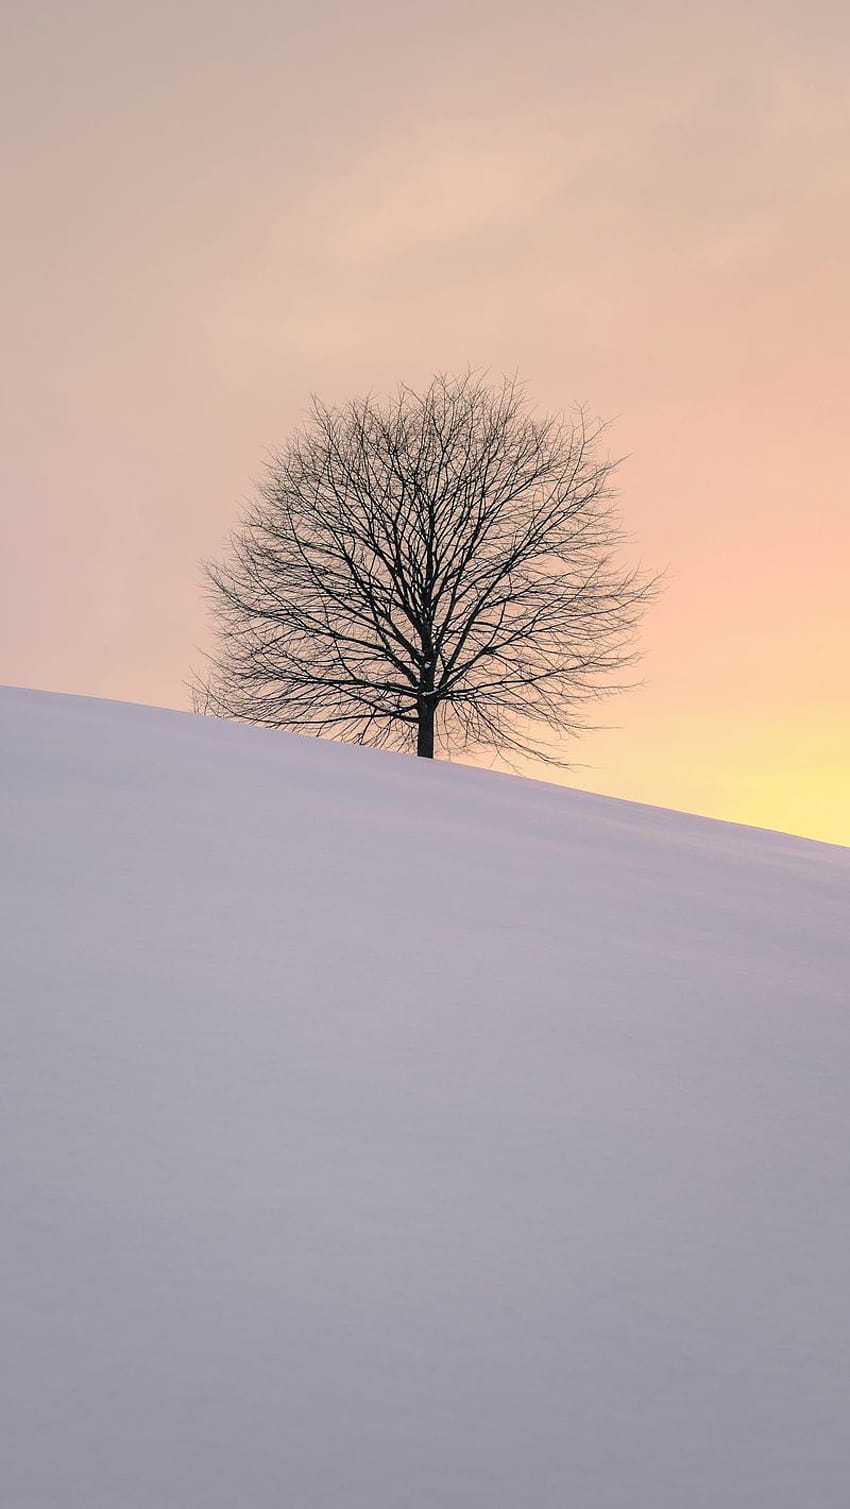 800x1420 tree, winter, minimalism, snow, hillock iphone se/5s/5c/5 for parallax backgrounds, minimalistic winter iphone HD phone wallpaper